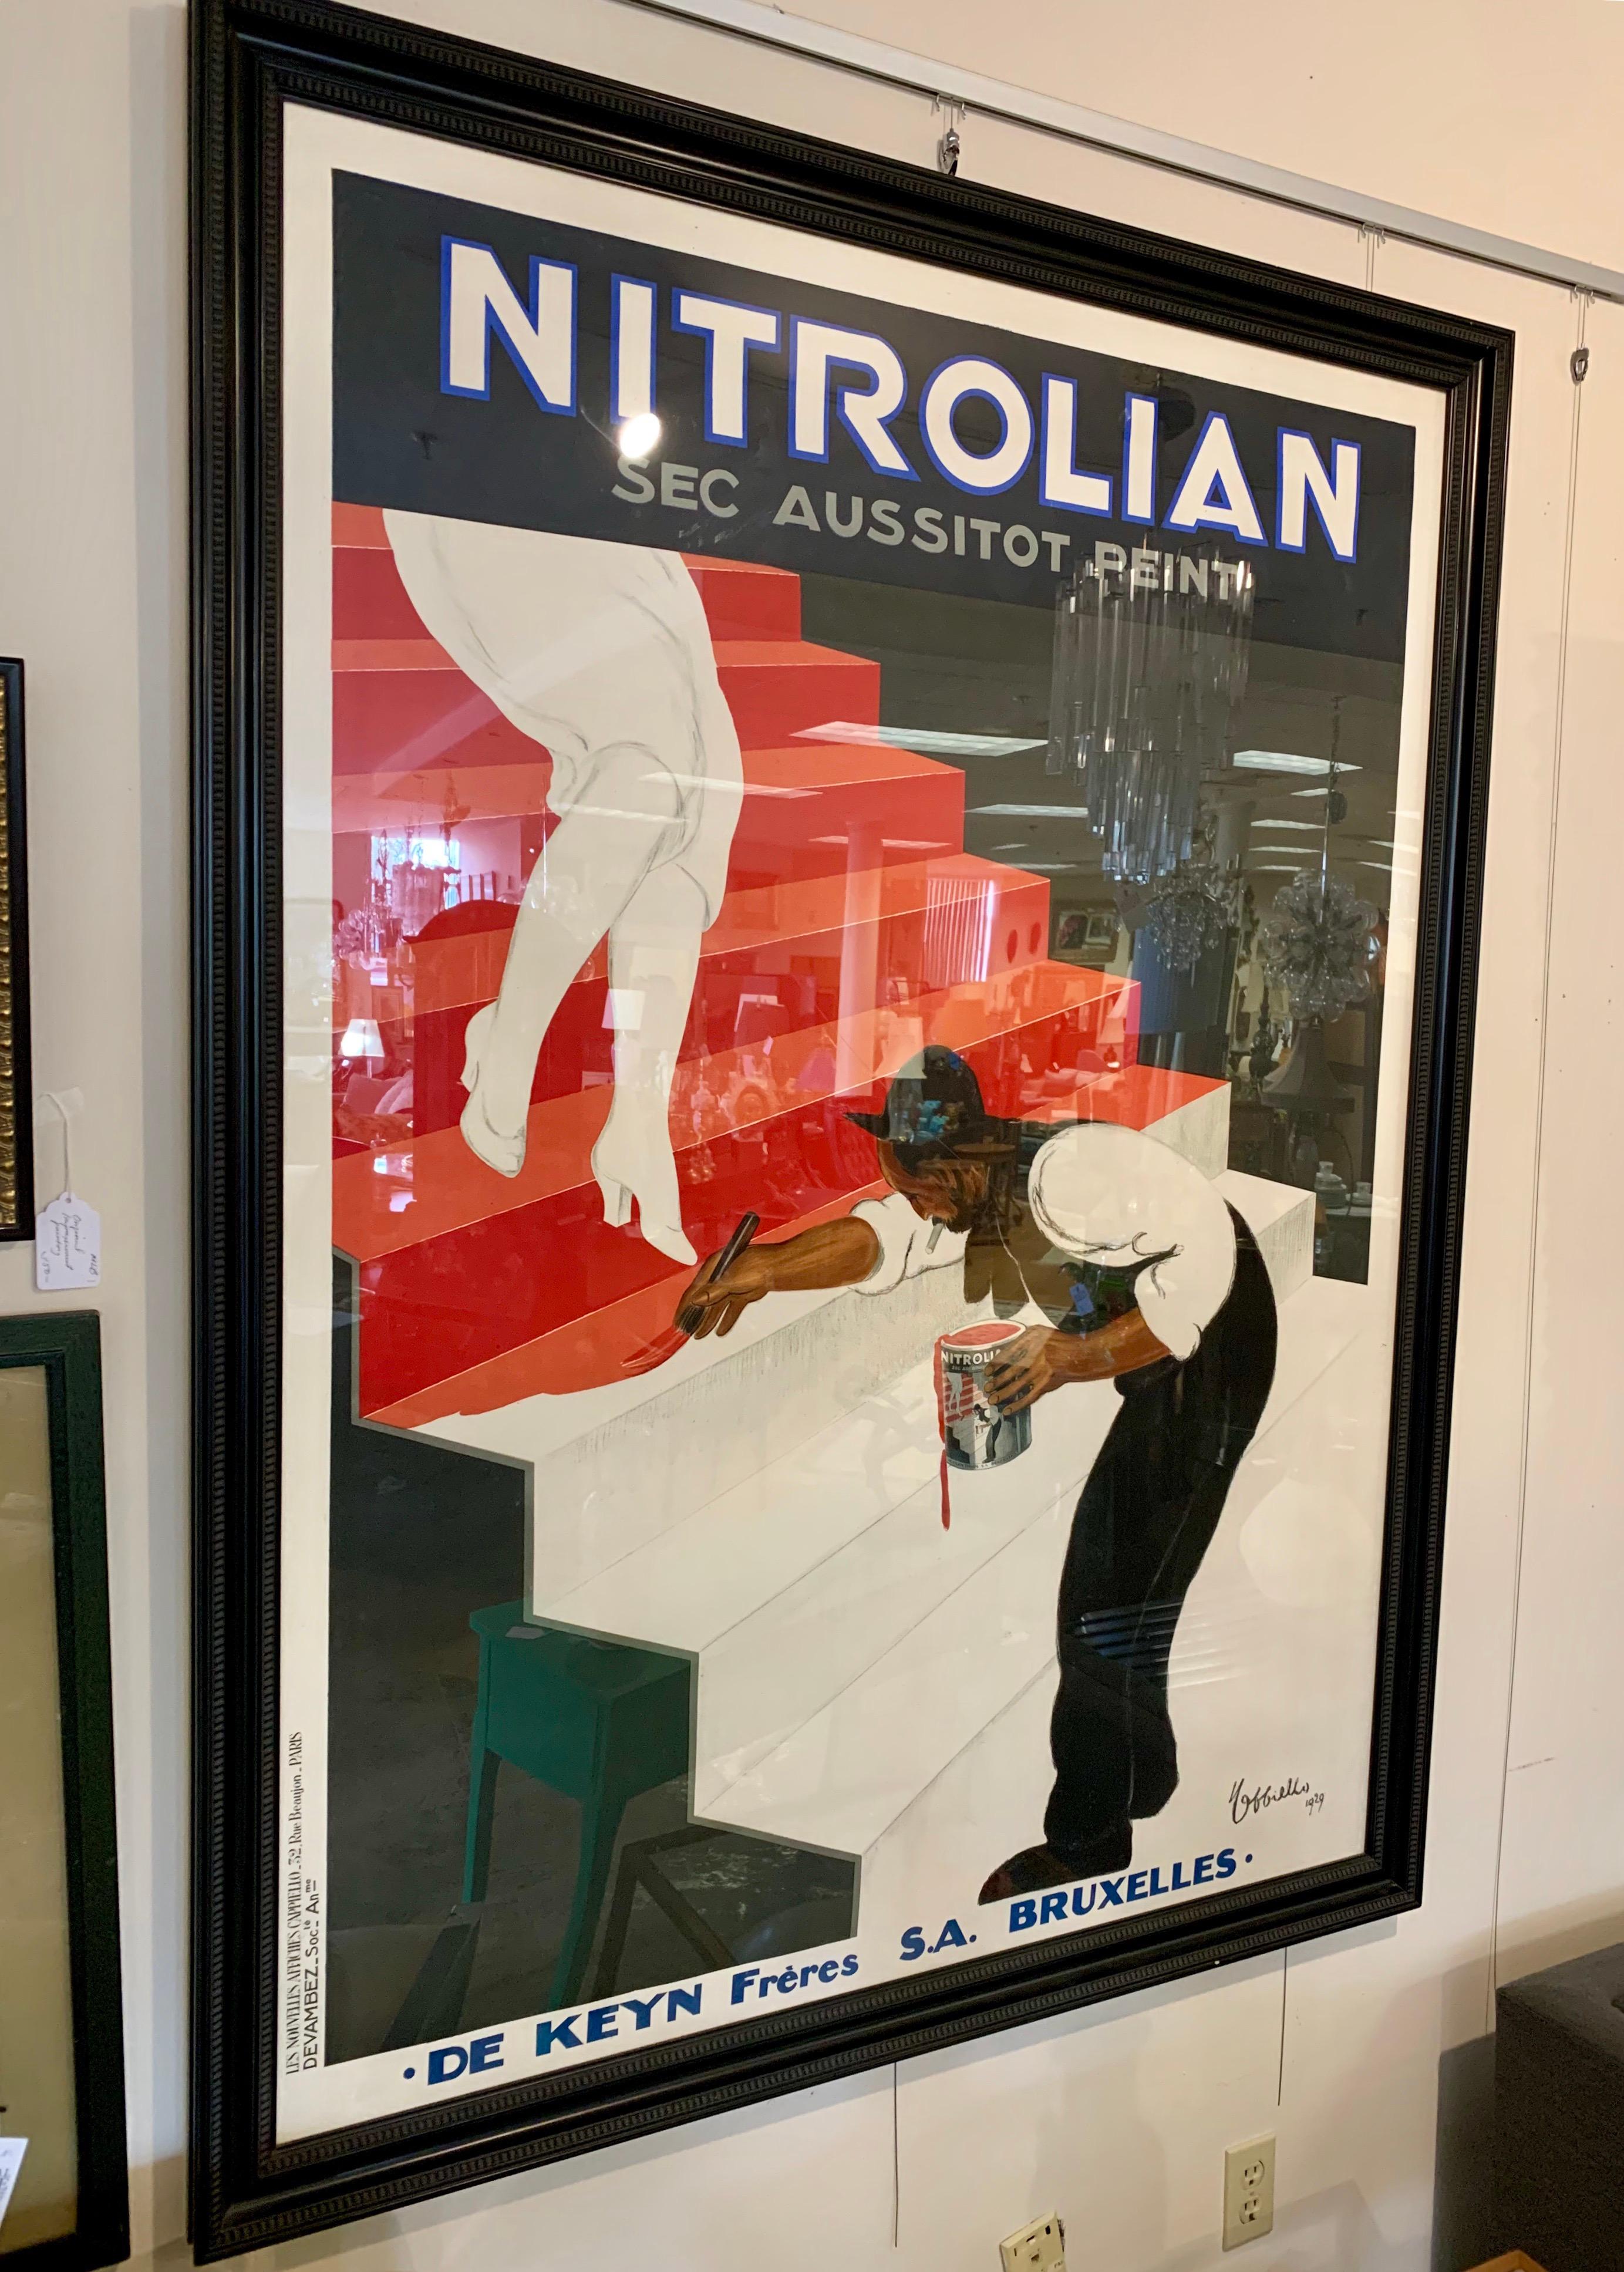 Sought after lithograph print poster of Nitrolian paint in a frame. Great colors and large scale.